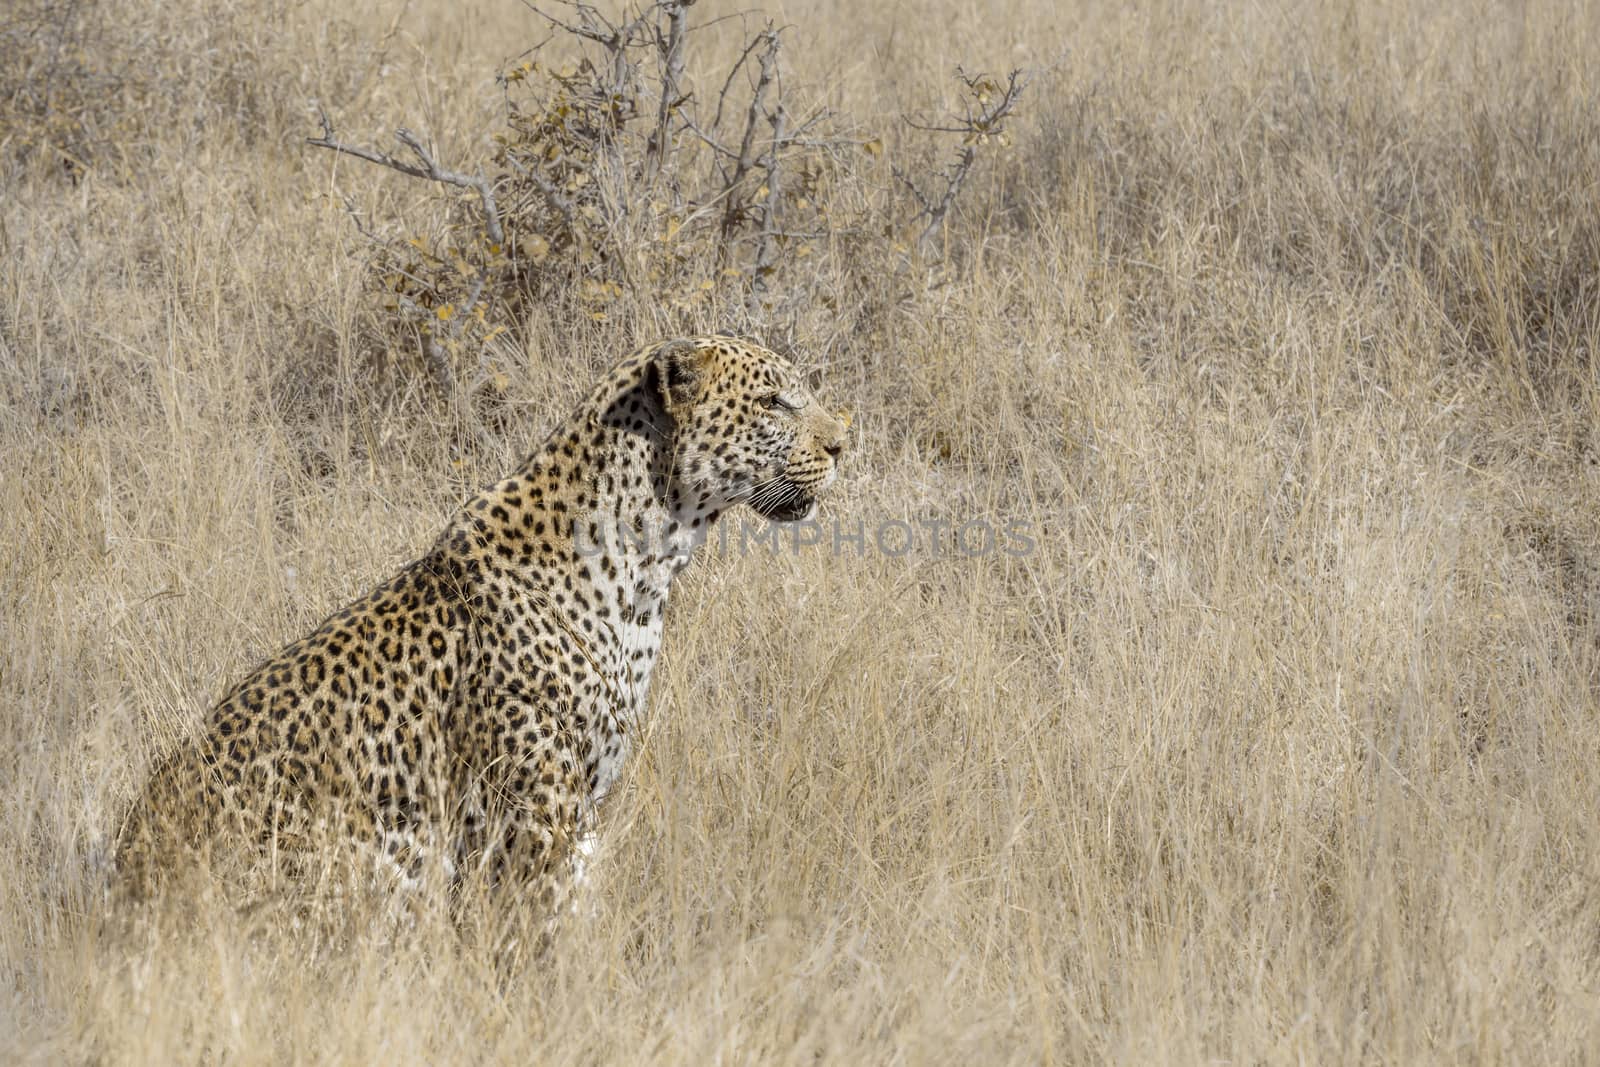 Leopard seated in grass in Kruger National park, South Africa ; Specie Panthera pardus family of Felidae